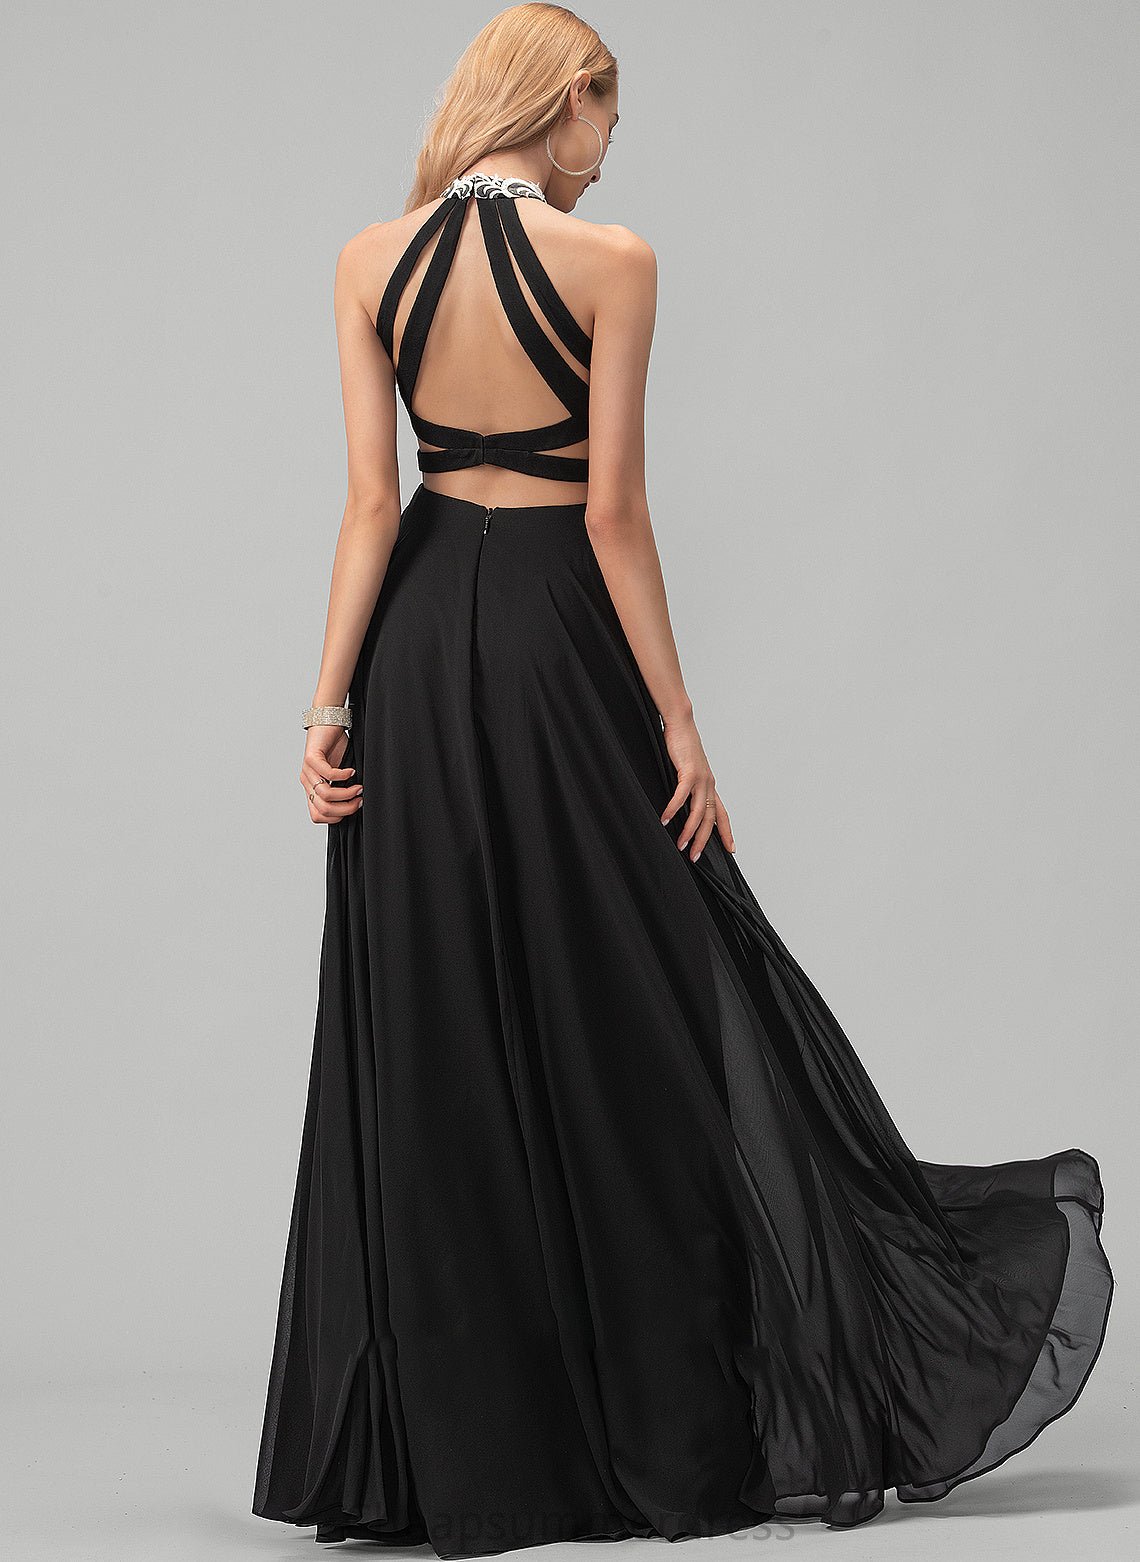 With Scoop Lace Iris Prom Dresses Chiffon Floor-Length A-Line Neck